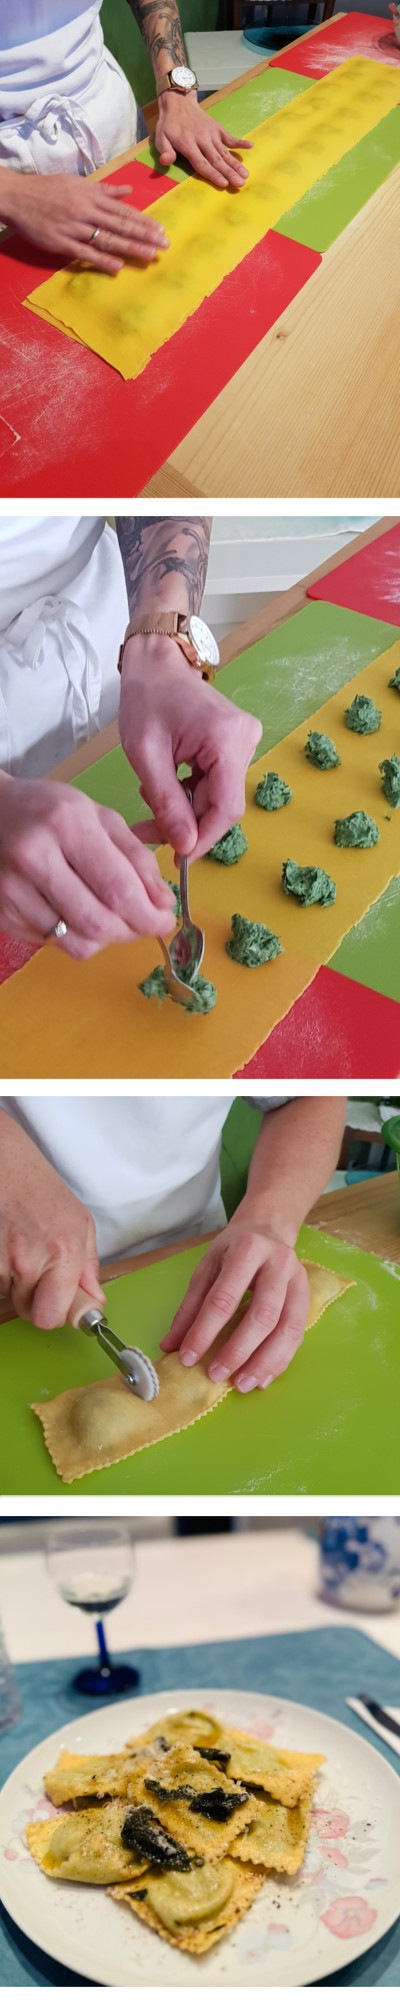 Homemade Gluten Free Ravioli Cooking Classes in Italy